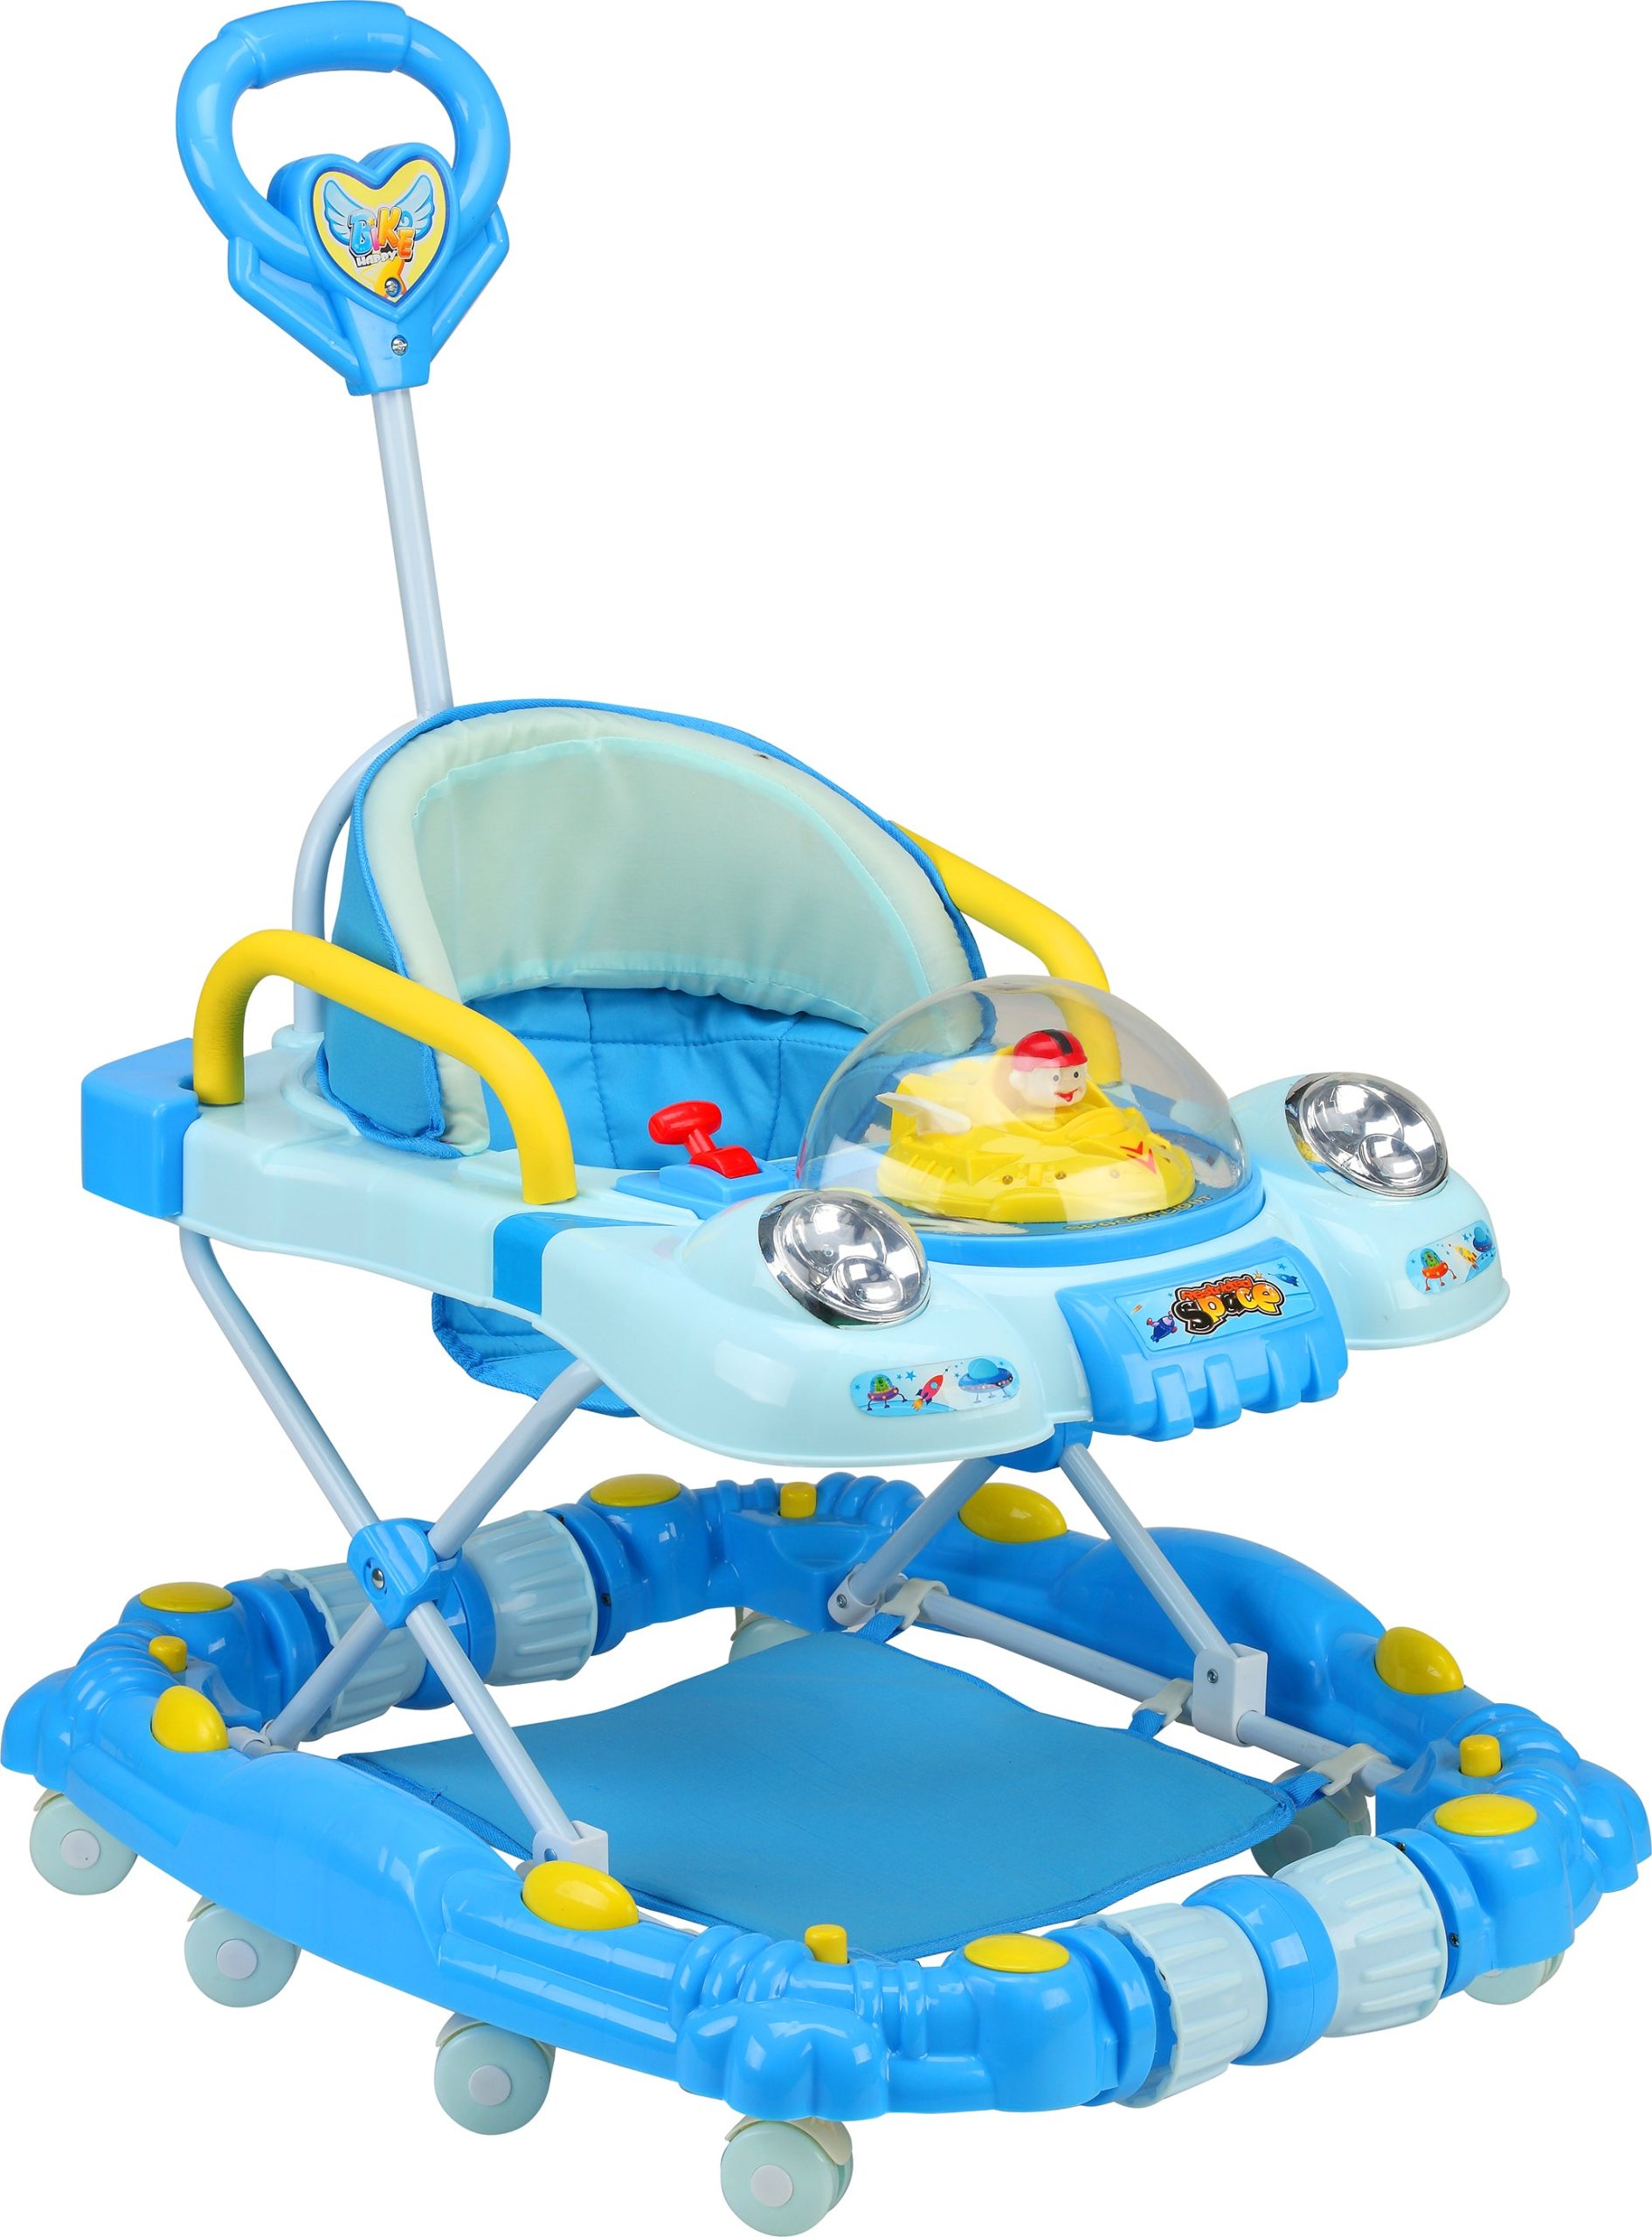 2-in-1 Baby Walker With Push Bar - Car Shape